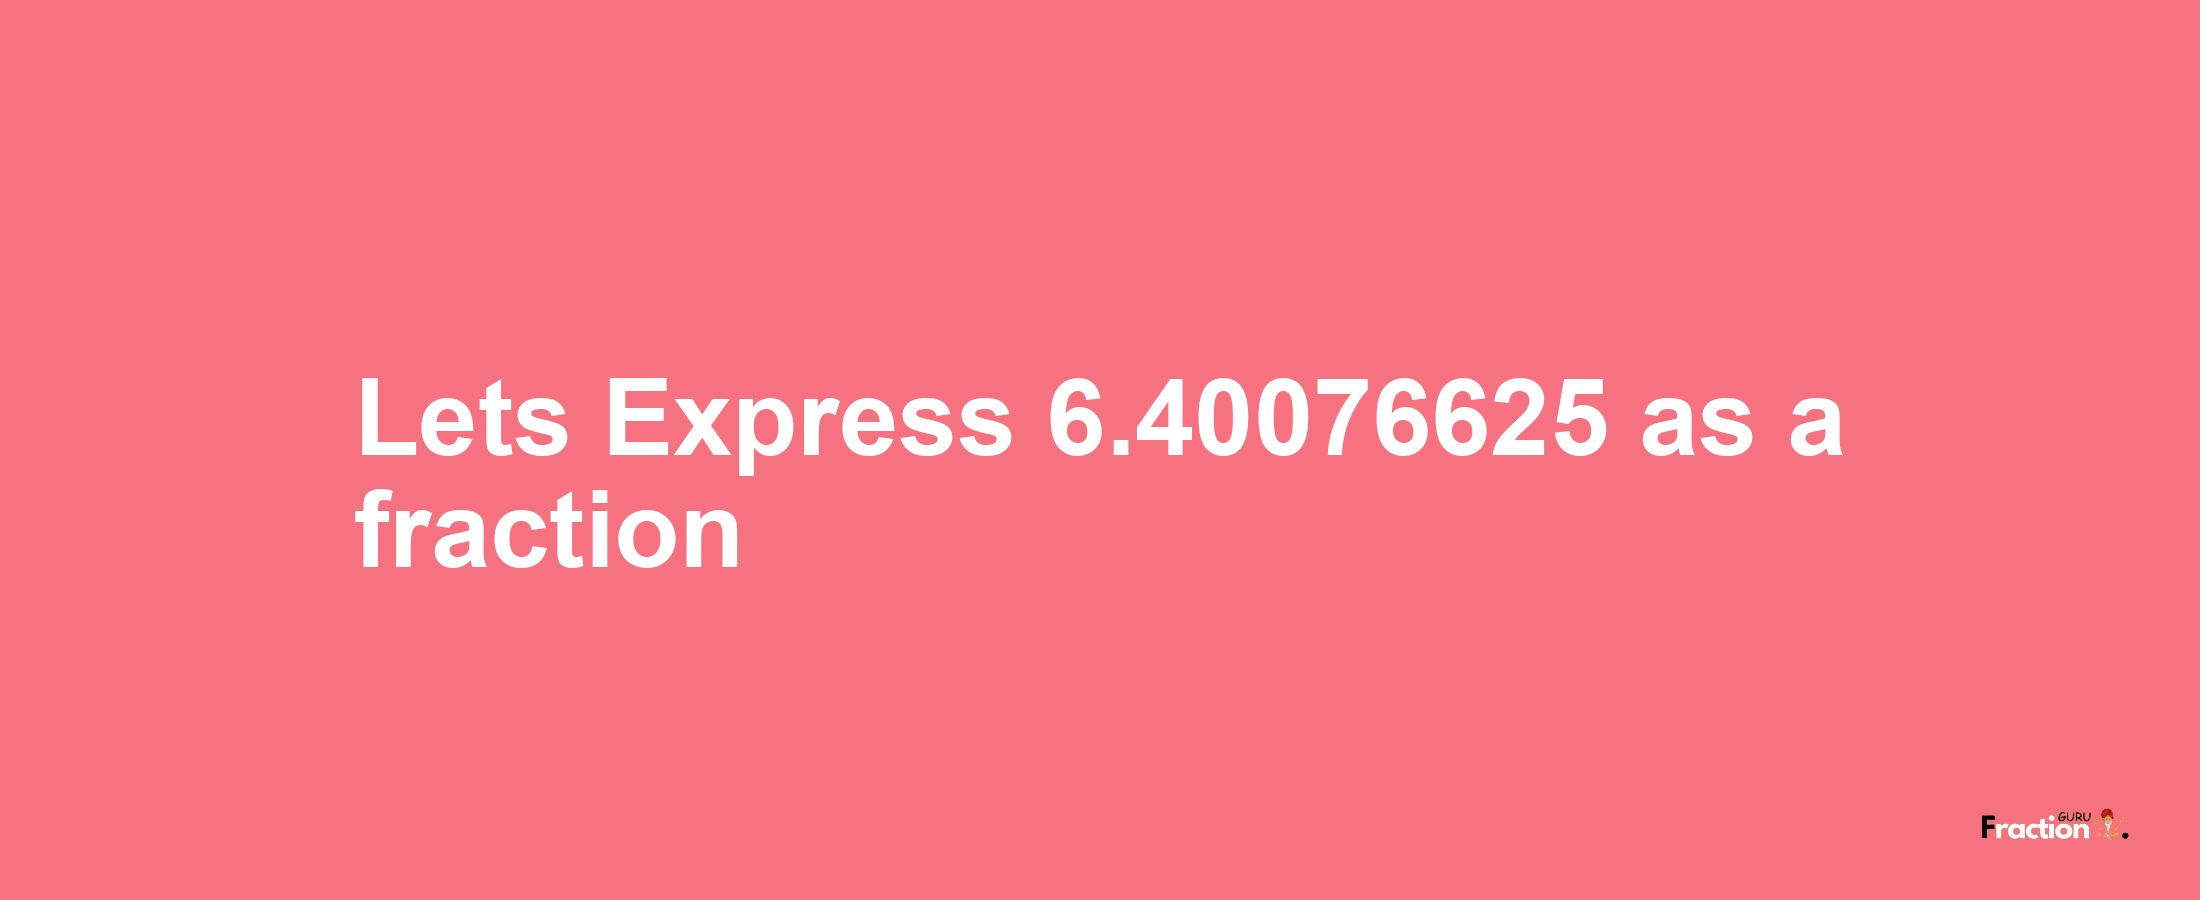 Lets Express 6.40076625 as afraction